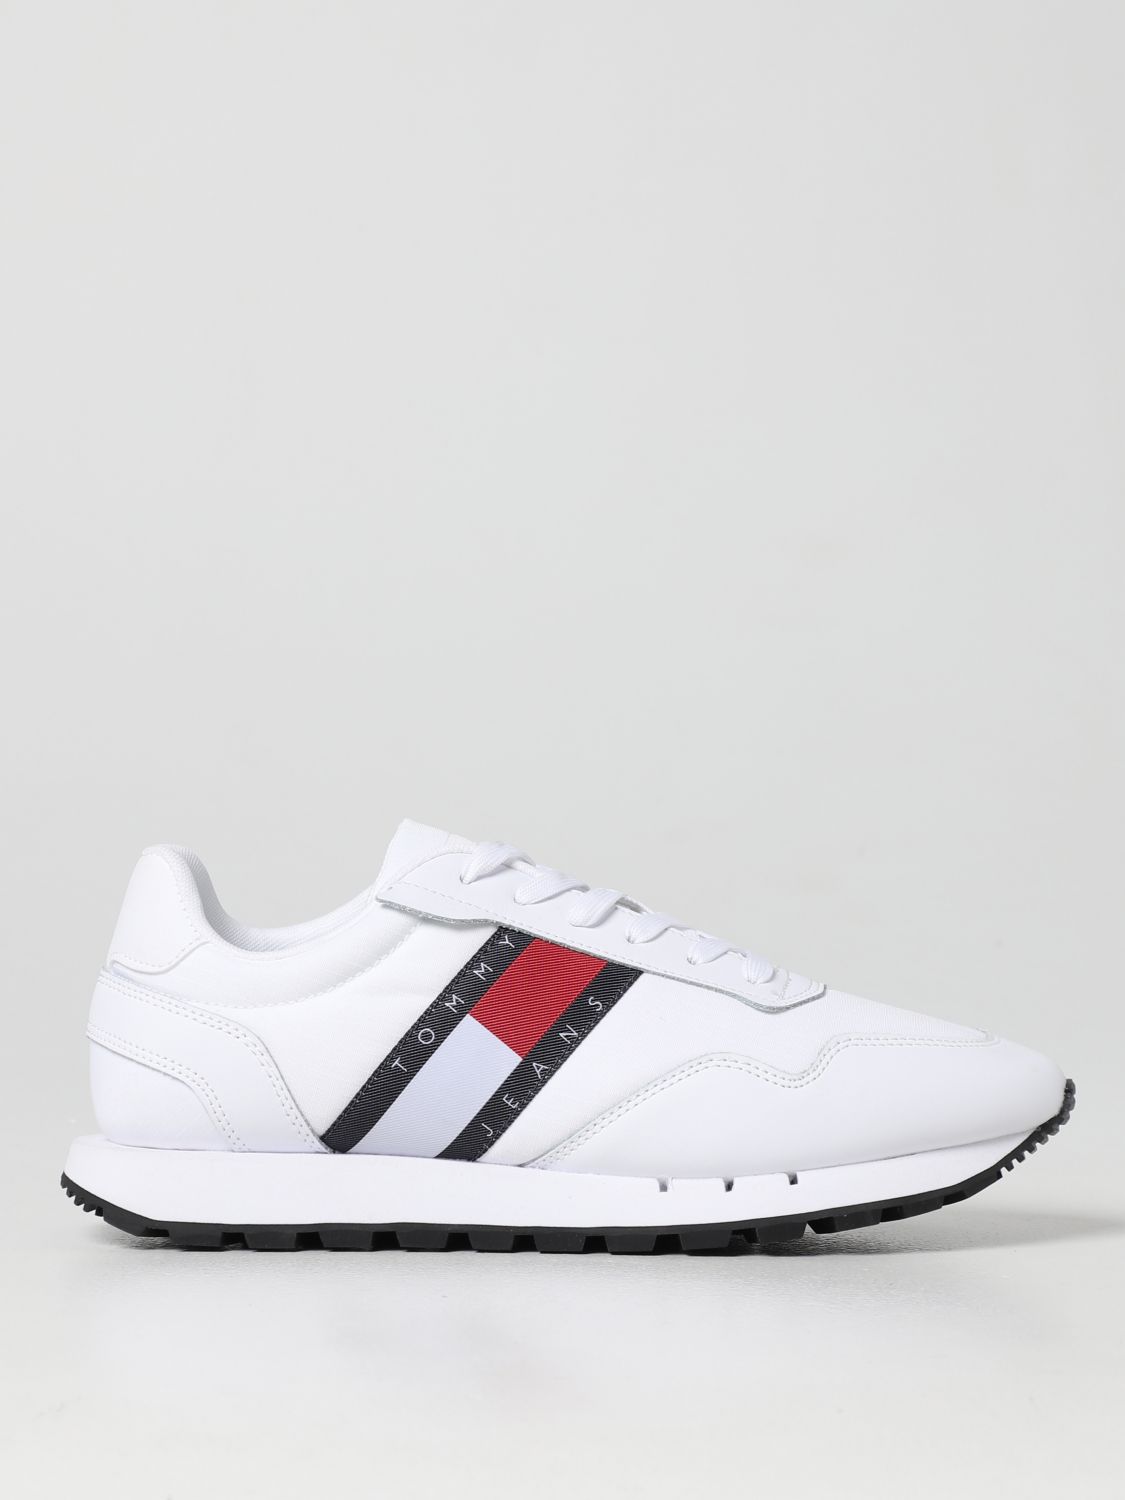 TOMMY HILFIGER: Tommy Jeans retro recycled fabric sneakers - White | Tommy Hilfiger sneakers EM0EM01014 online GIGLIO.COM